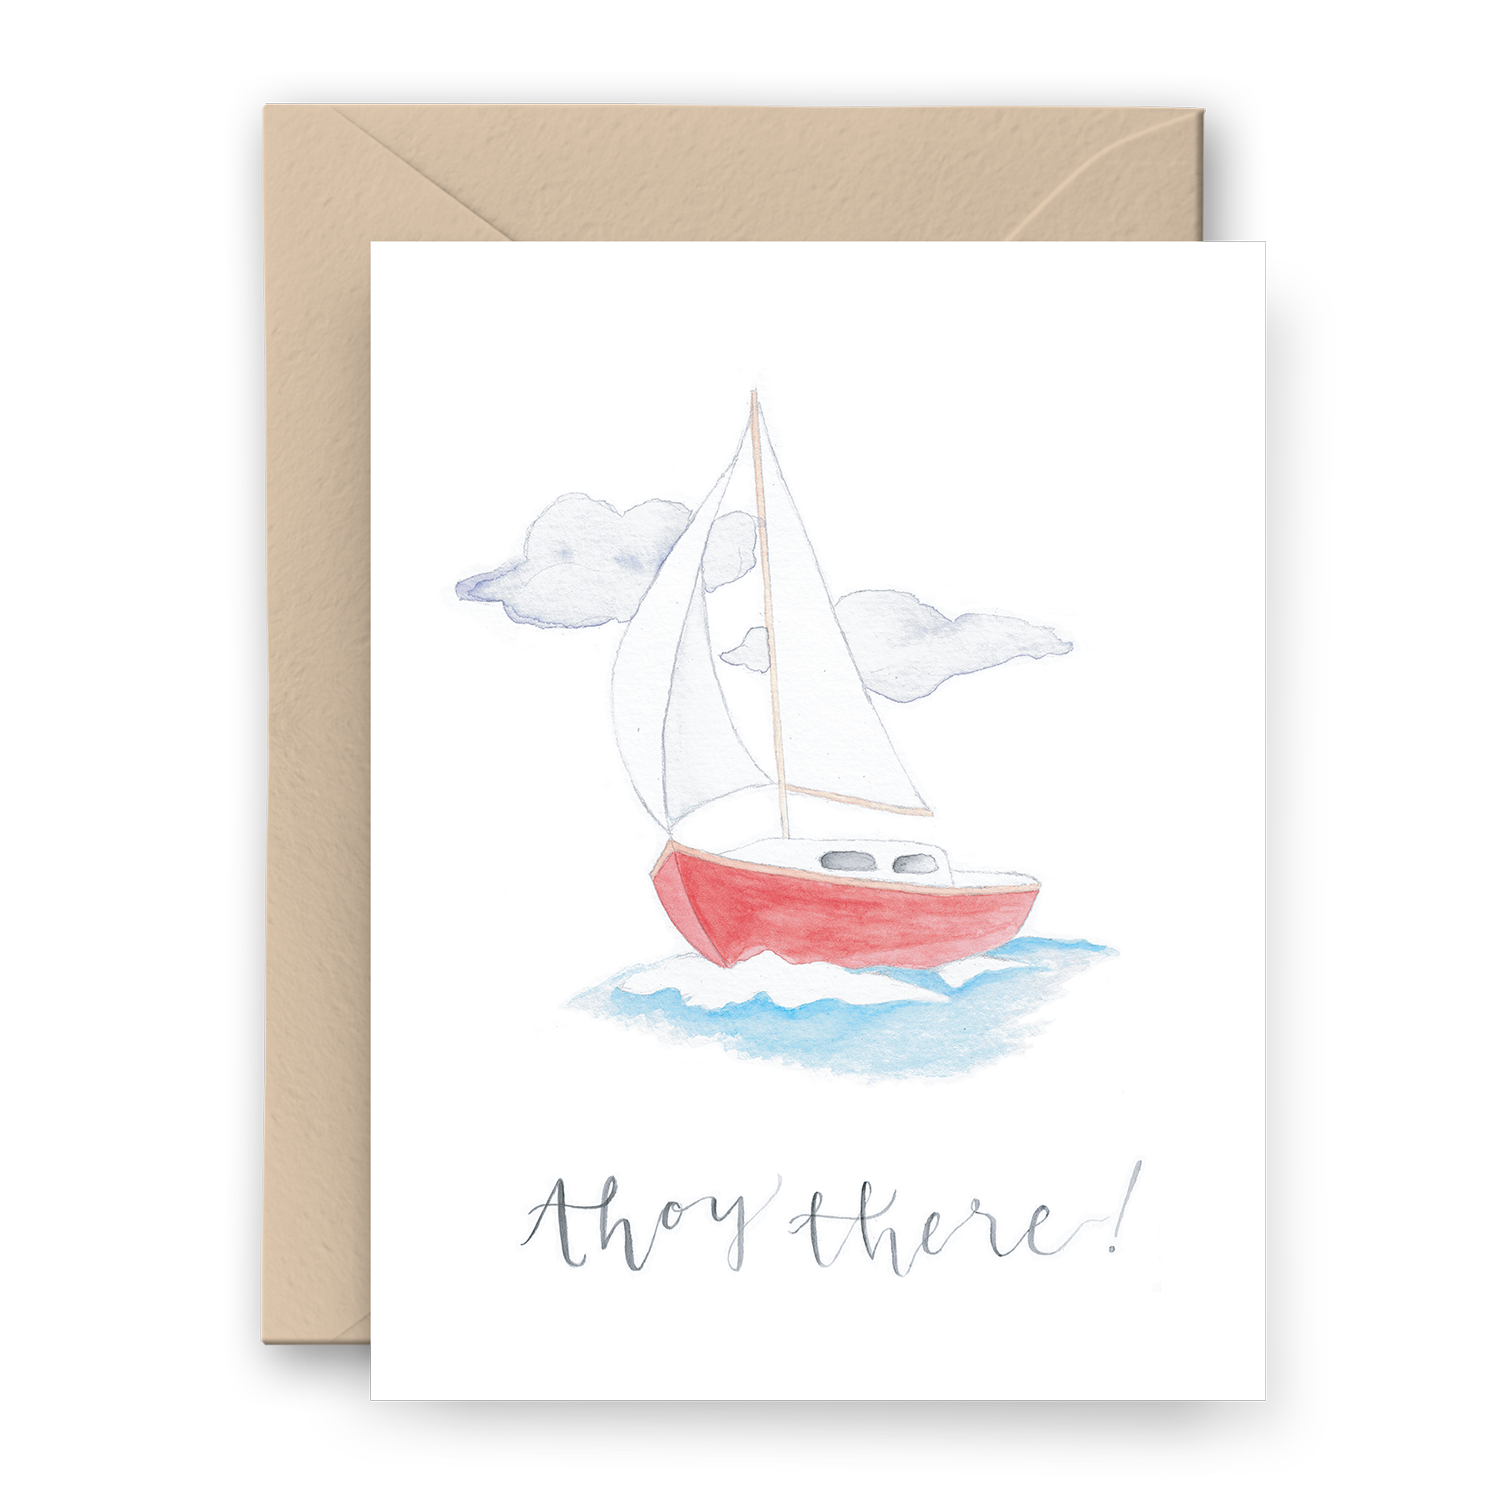 Greeting Cars with Red Sailboat and "Ahoy There" text.